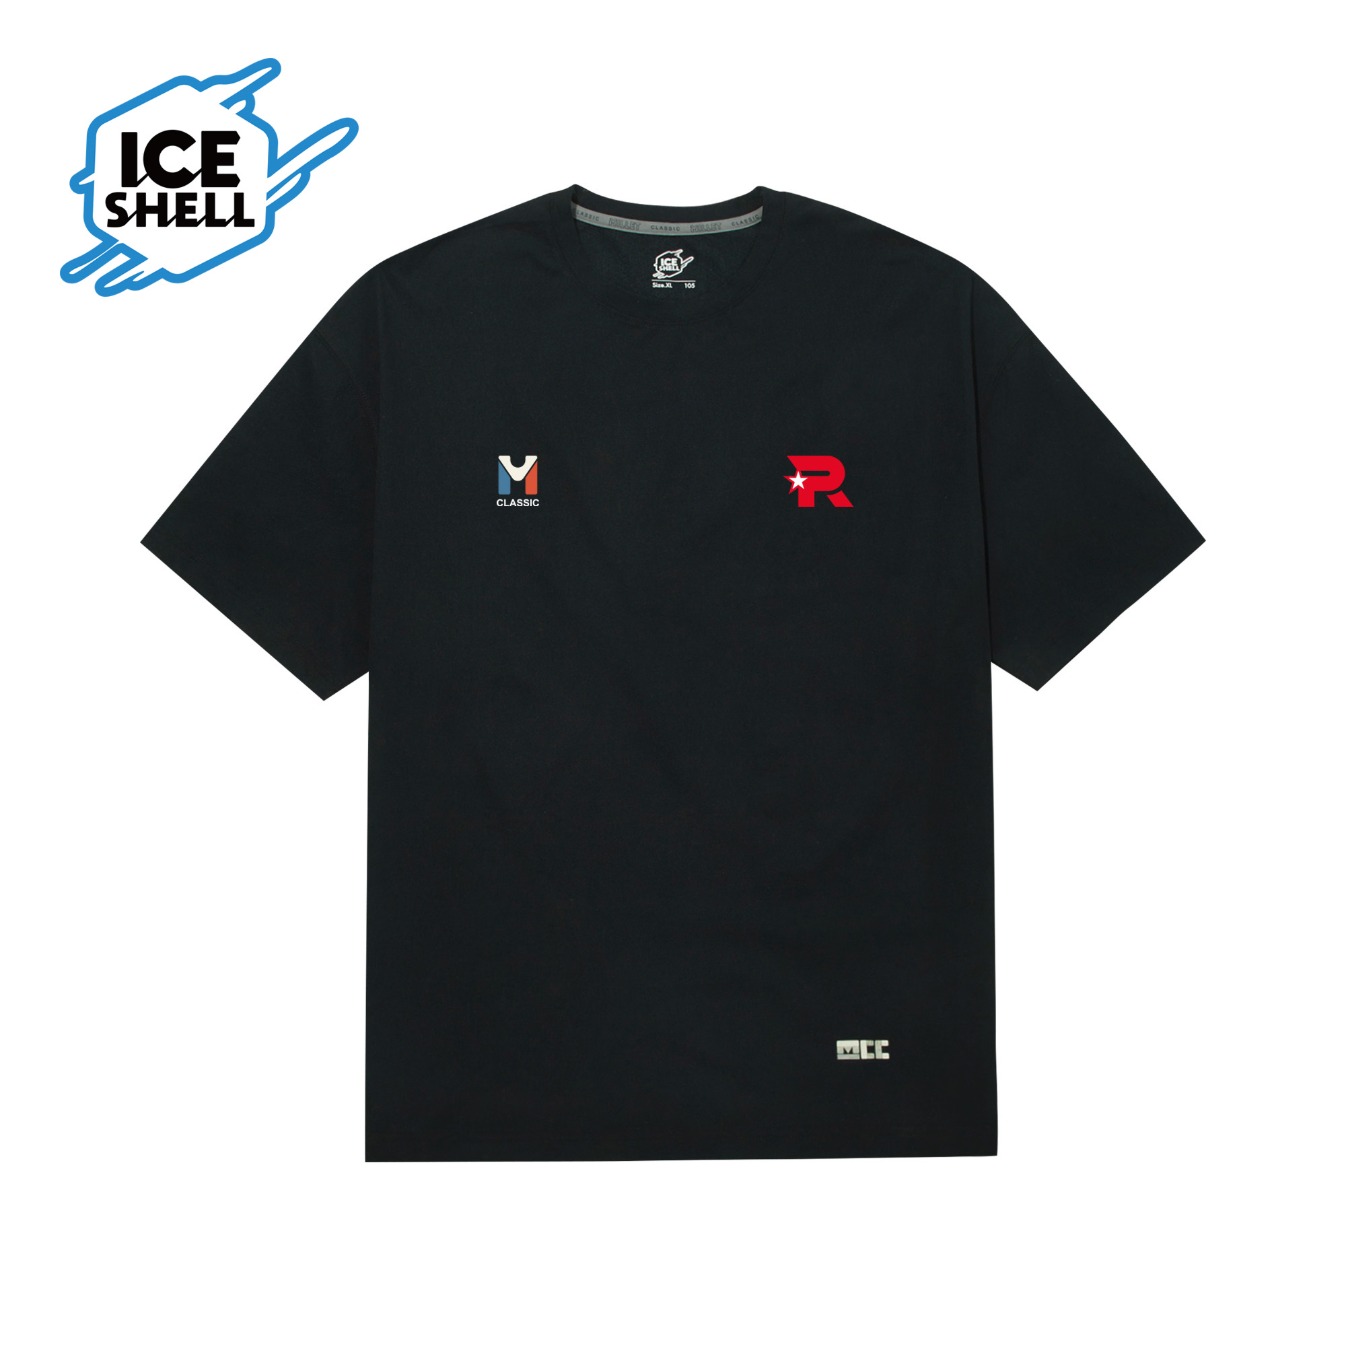 X KT ROLSTER ICE SHELL T-SHIRTS BLACK